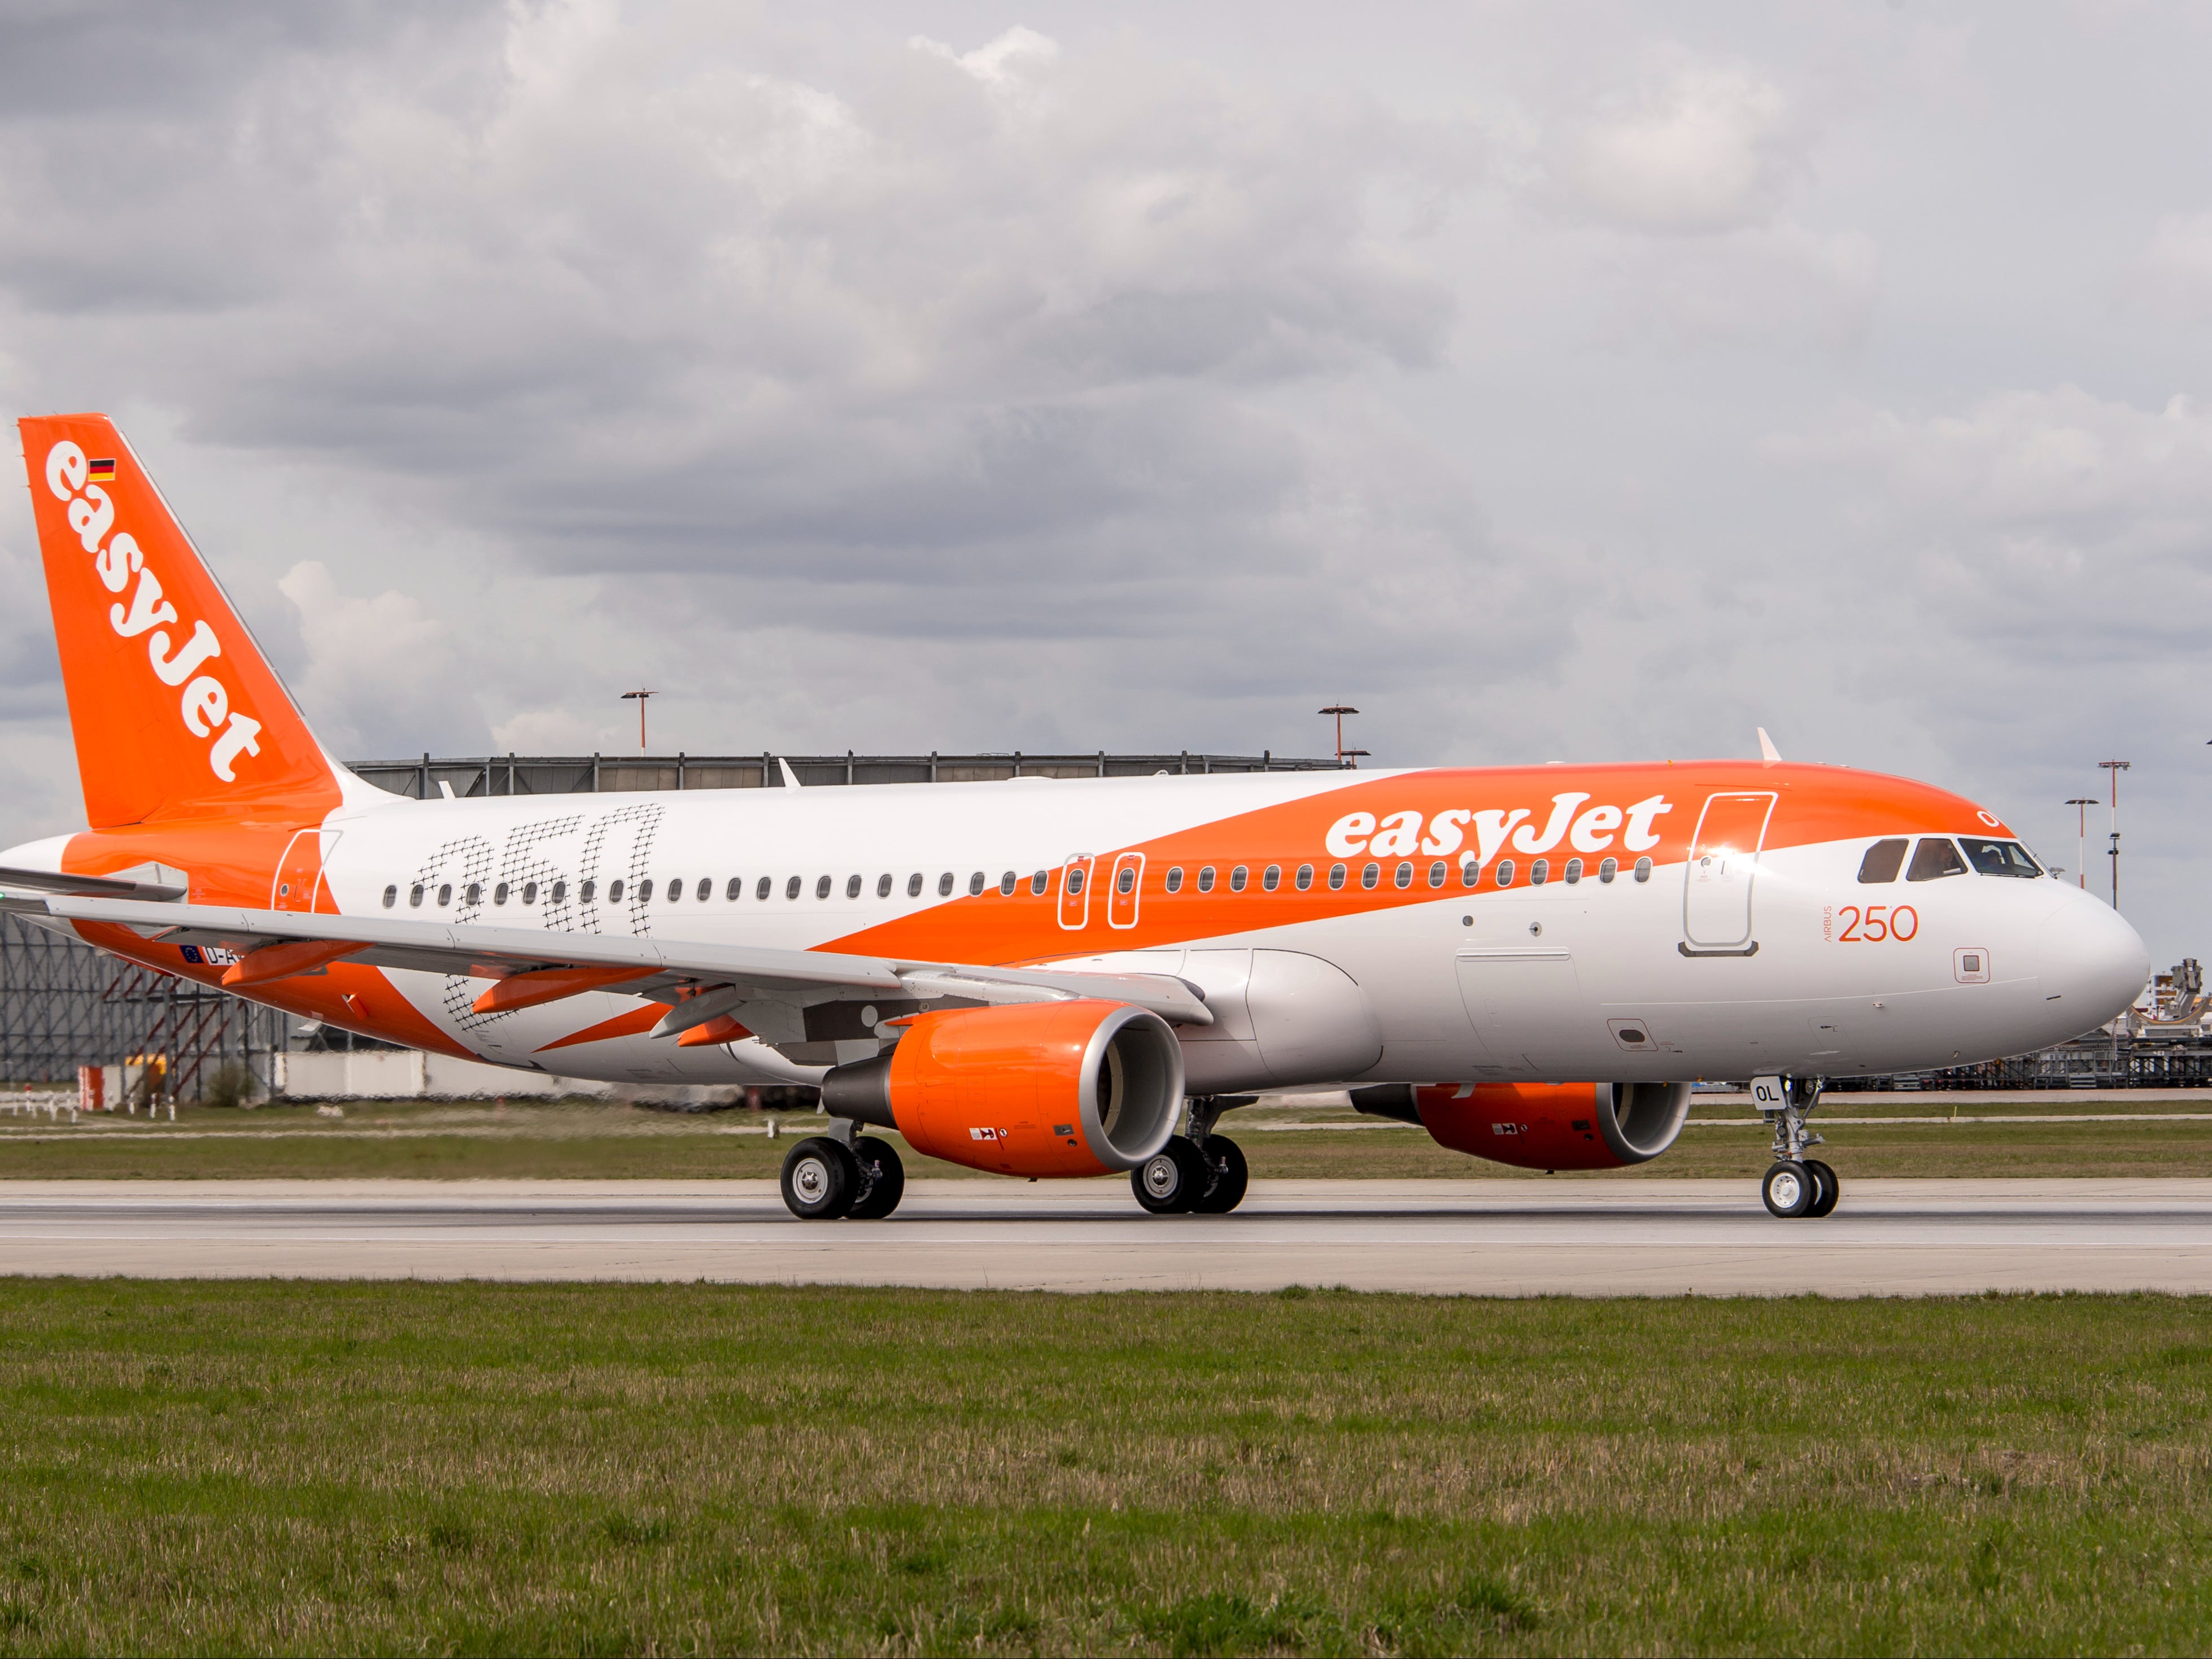 An easyJet Airbus A320 at Gatwick airport, the airline’s biggest base